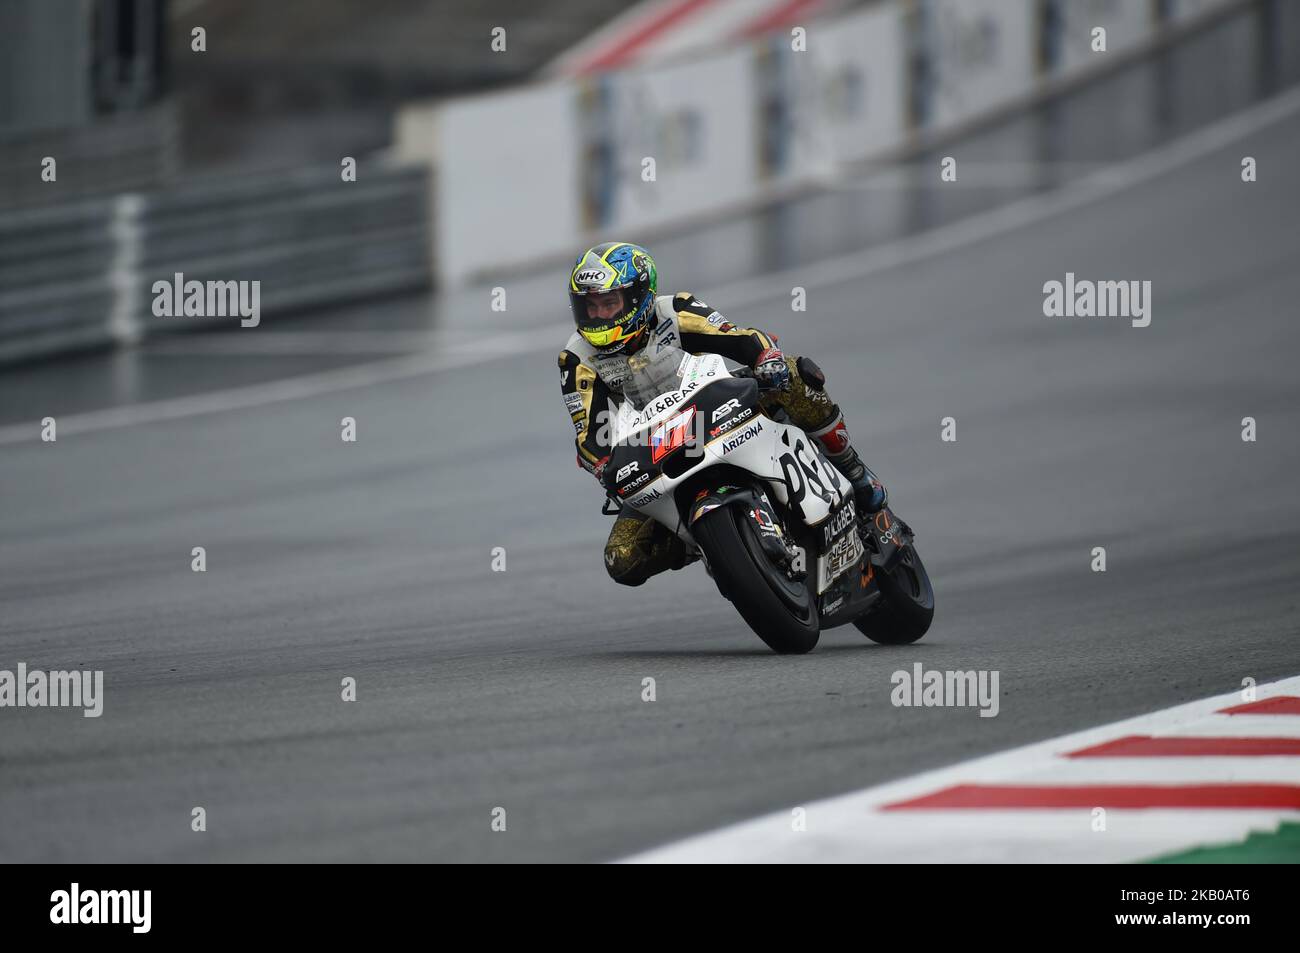 17 Czech driver Karel Abraham of Team Aspar MotoGP Team race during free  practice of Austrian MotoGP grand prix in Red Bull Ring in Spielberg,  Austria, on August 10, 2018. (Photo by